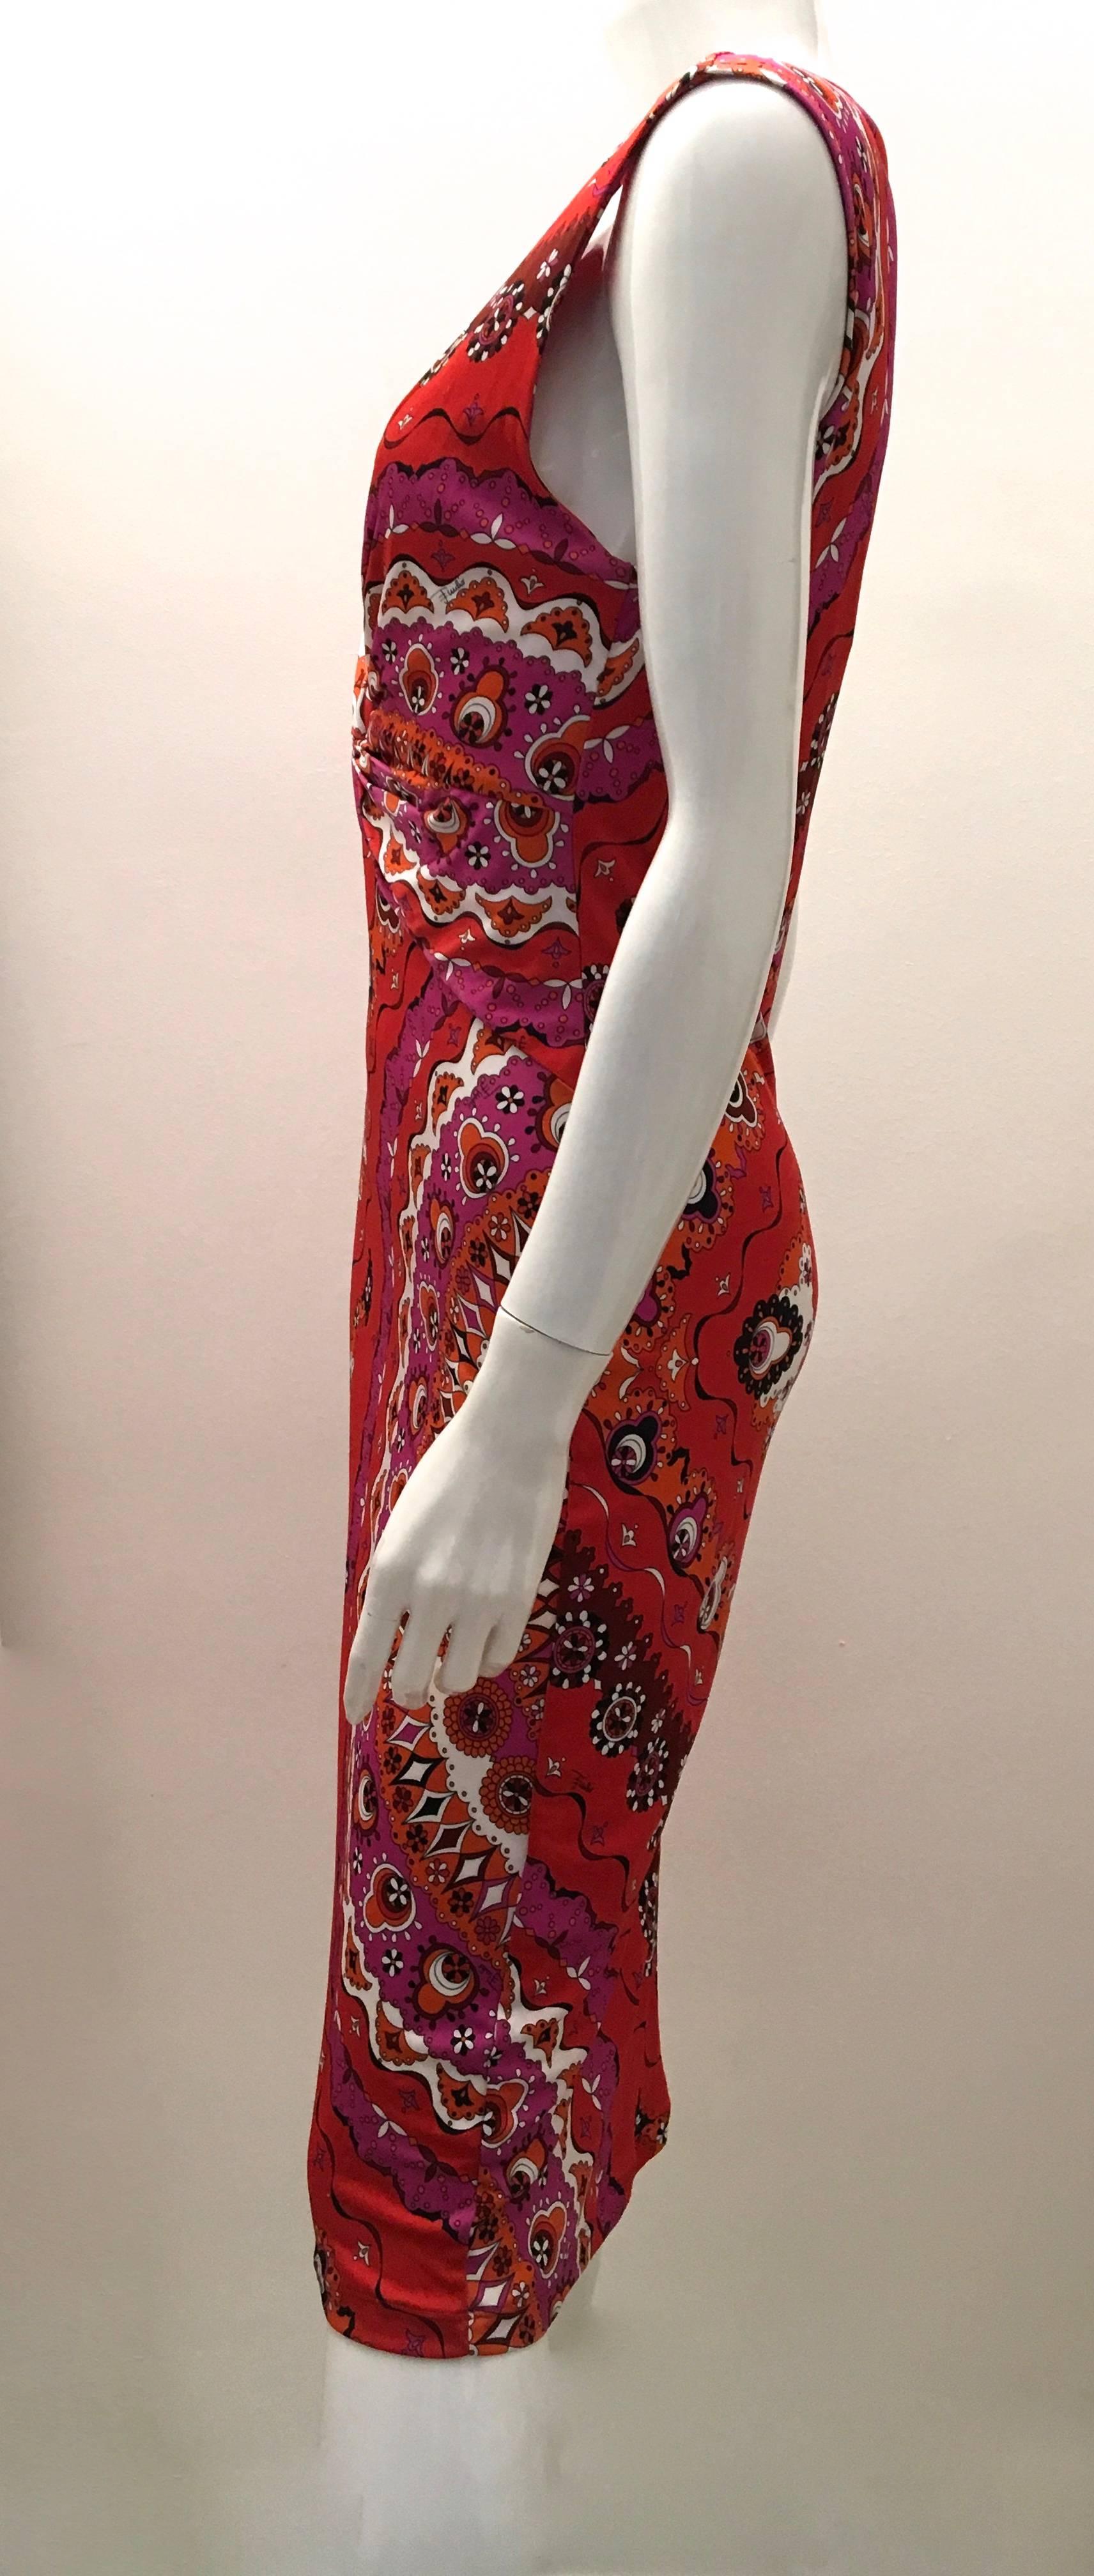 Presented here is a magnificent dress from Emilio Pucci. The garment is new and has only been used for fittings. The dress is a size 44 Italian. The dress is patterned in a design comprised of red, magenta, dark orange, white and black. The dress is